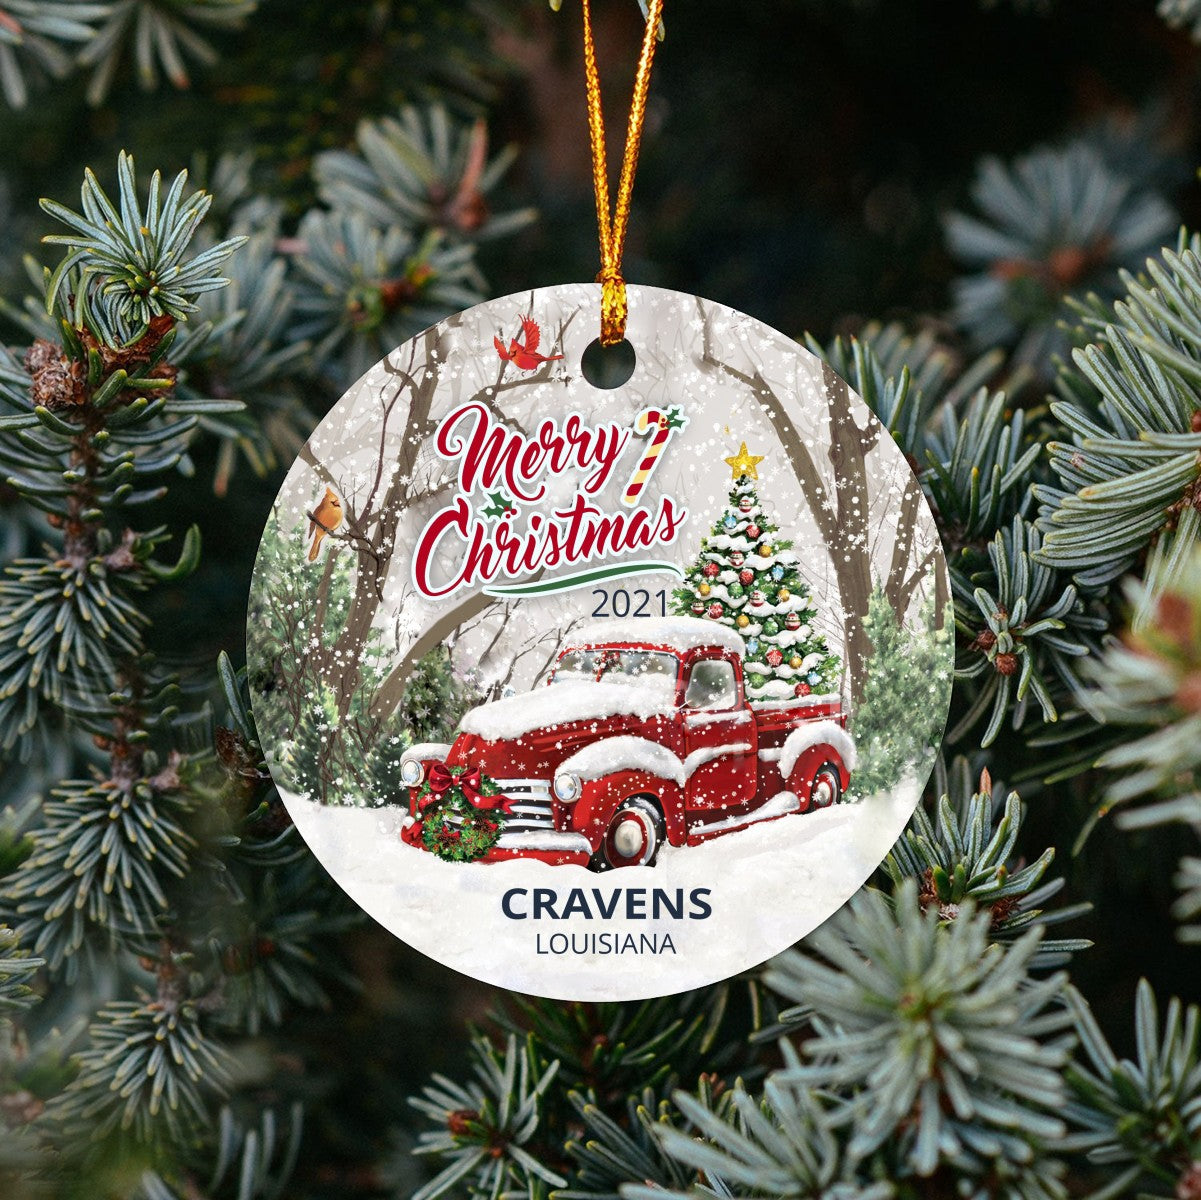 Christmas Tree Ornaments Cravens - Ornament With Name City, State Cravens Louisiana LA Ornament - Red Truck Xmas Ornaments 3'' Plastic Gift For Family, Friend And Housewarming